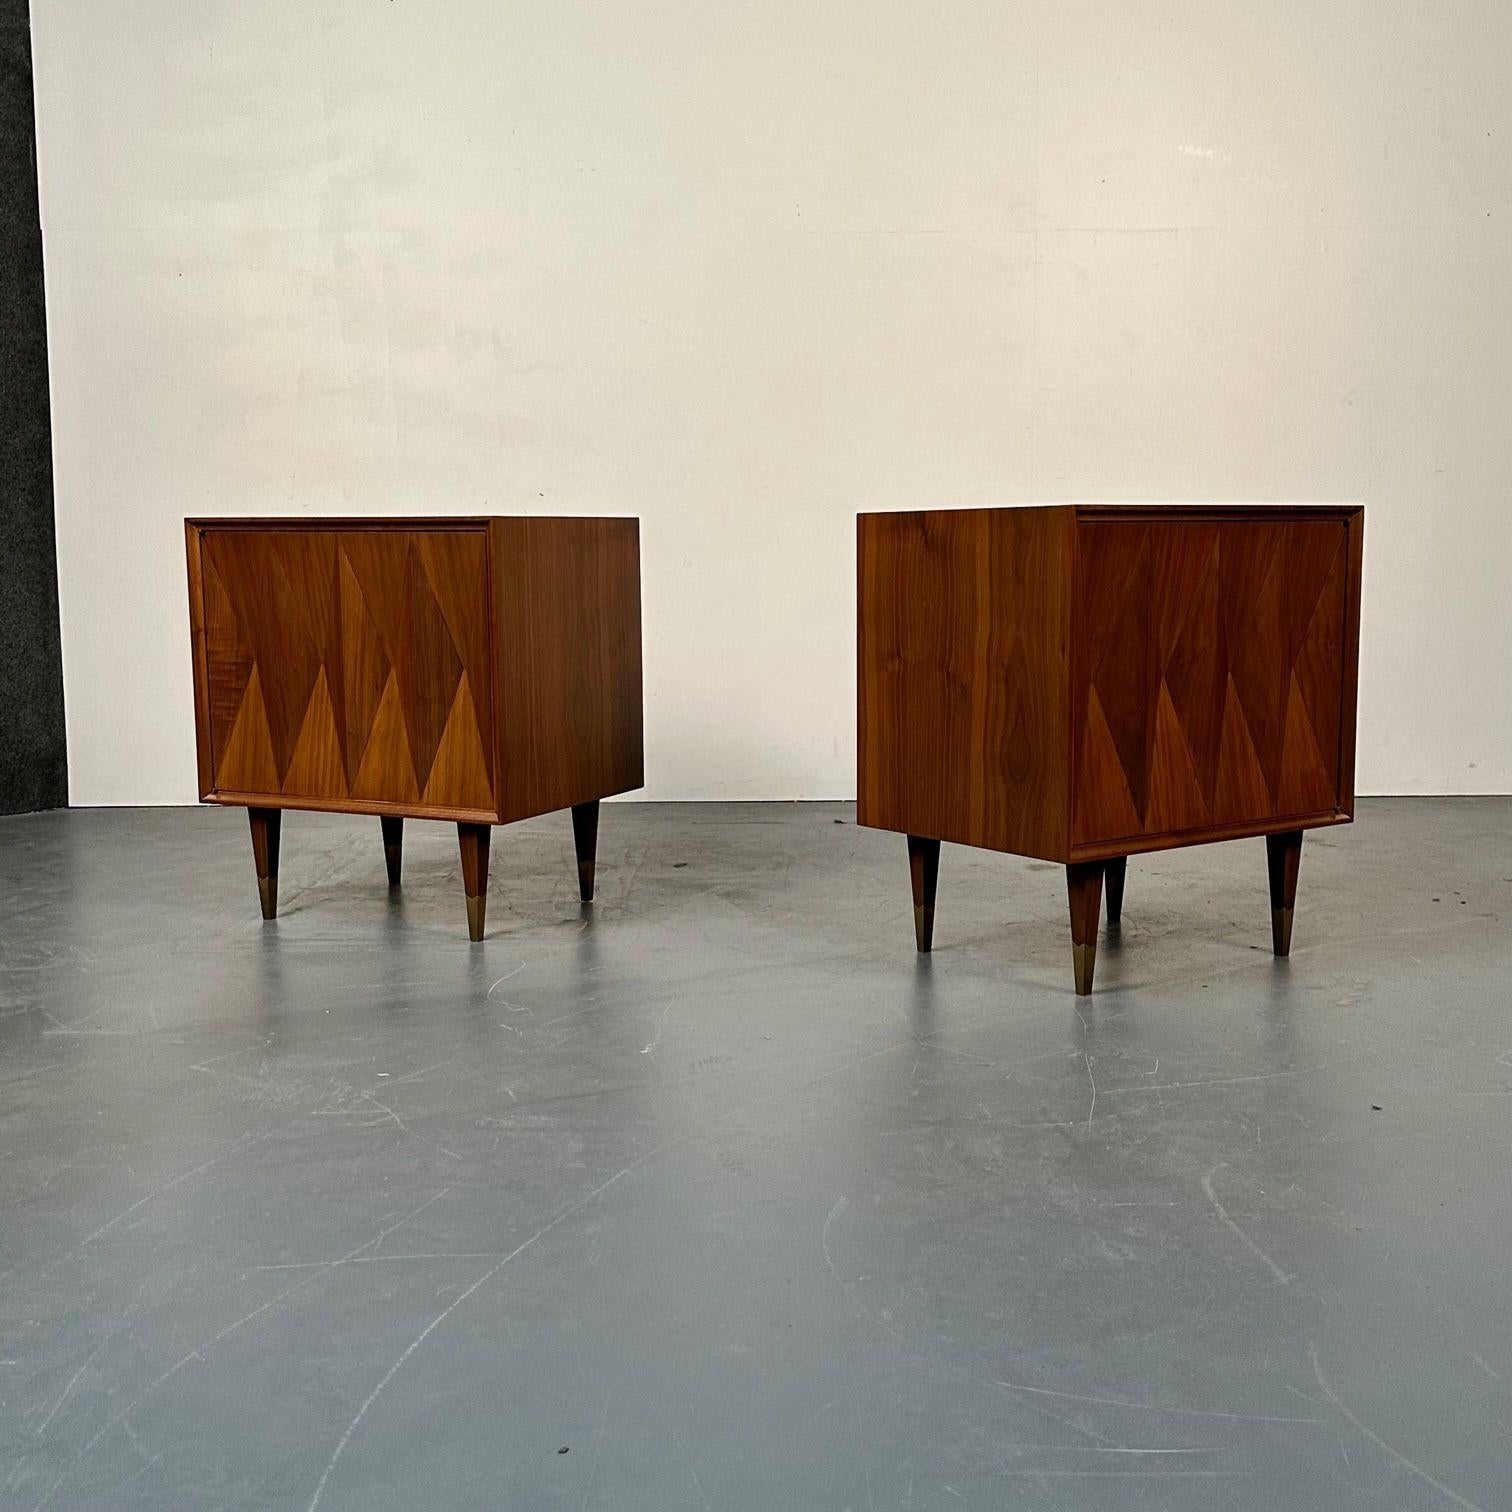 Pair of Danish Mid-Century Modern Style Geometric Nightstands, Walnut, Brass In Good Condition For Sale In Stamford, CT